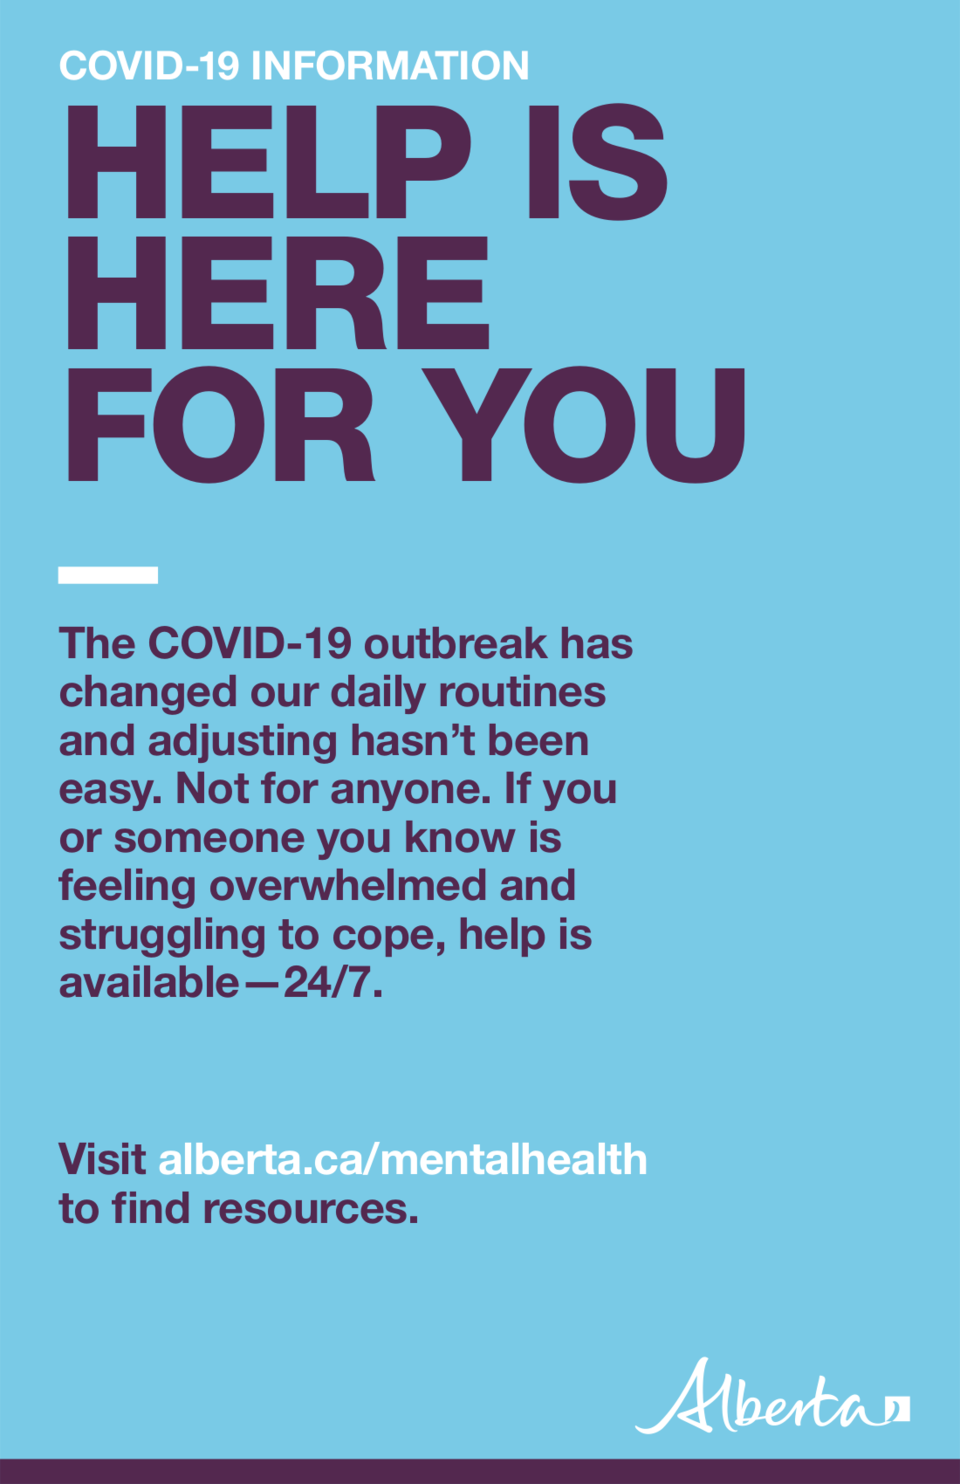 covid-19-help-is-here-for-you-poster-11x17-english-colour